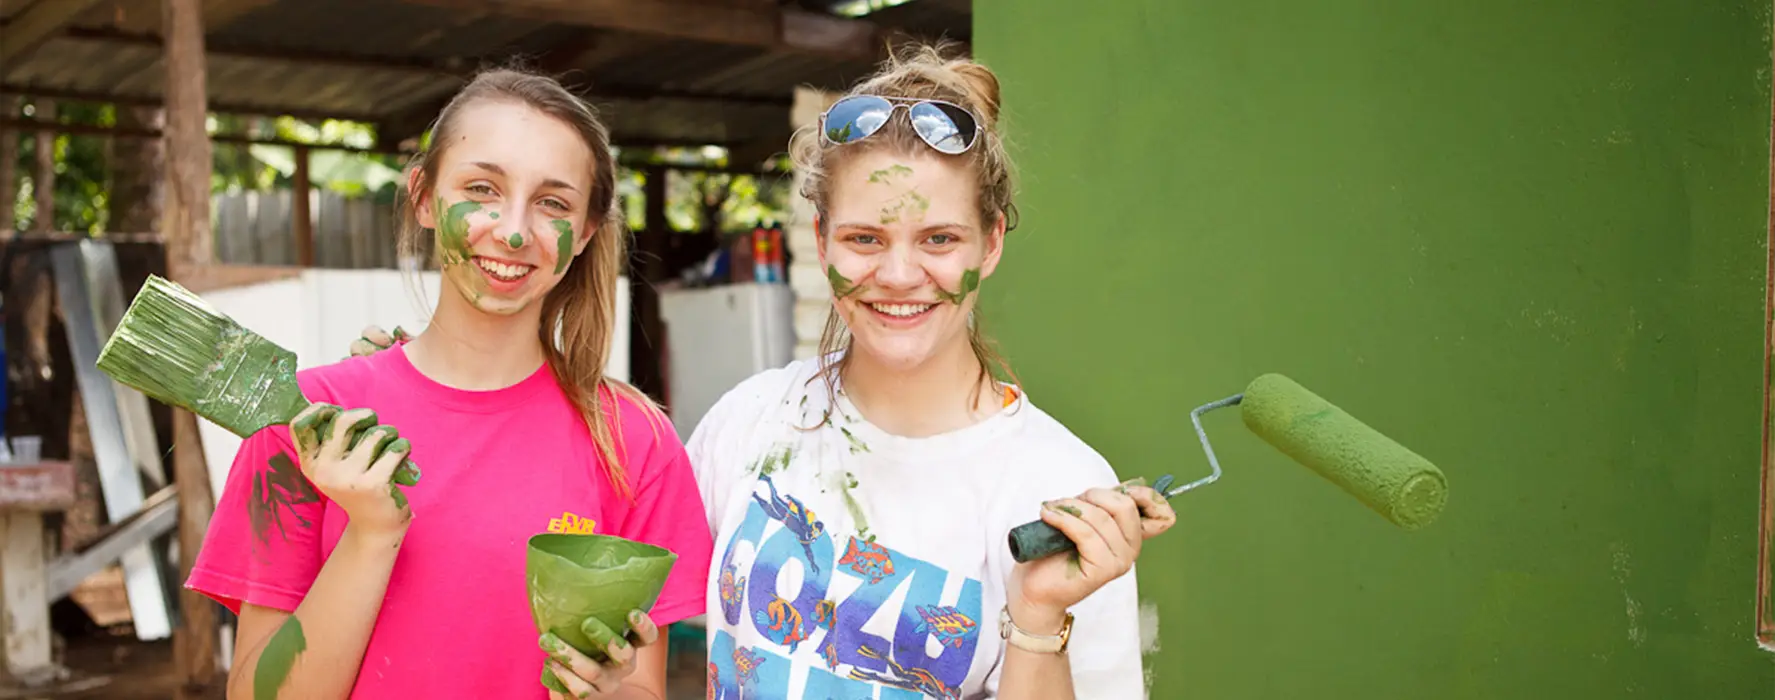 Two students painting a wall, with green paint splashes on their faces.